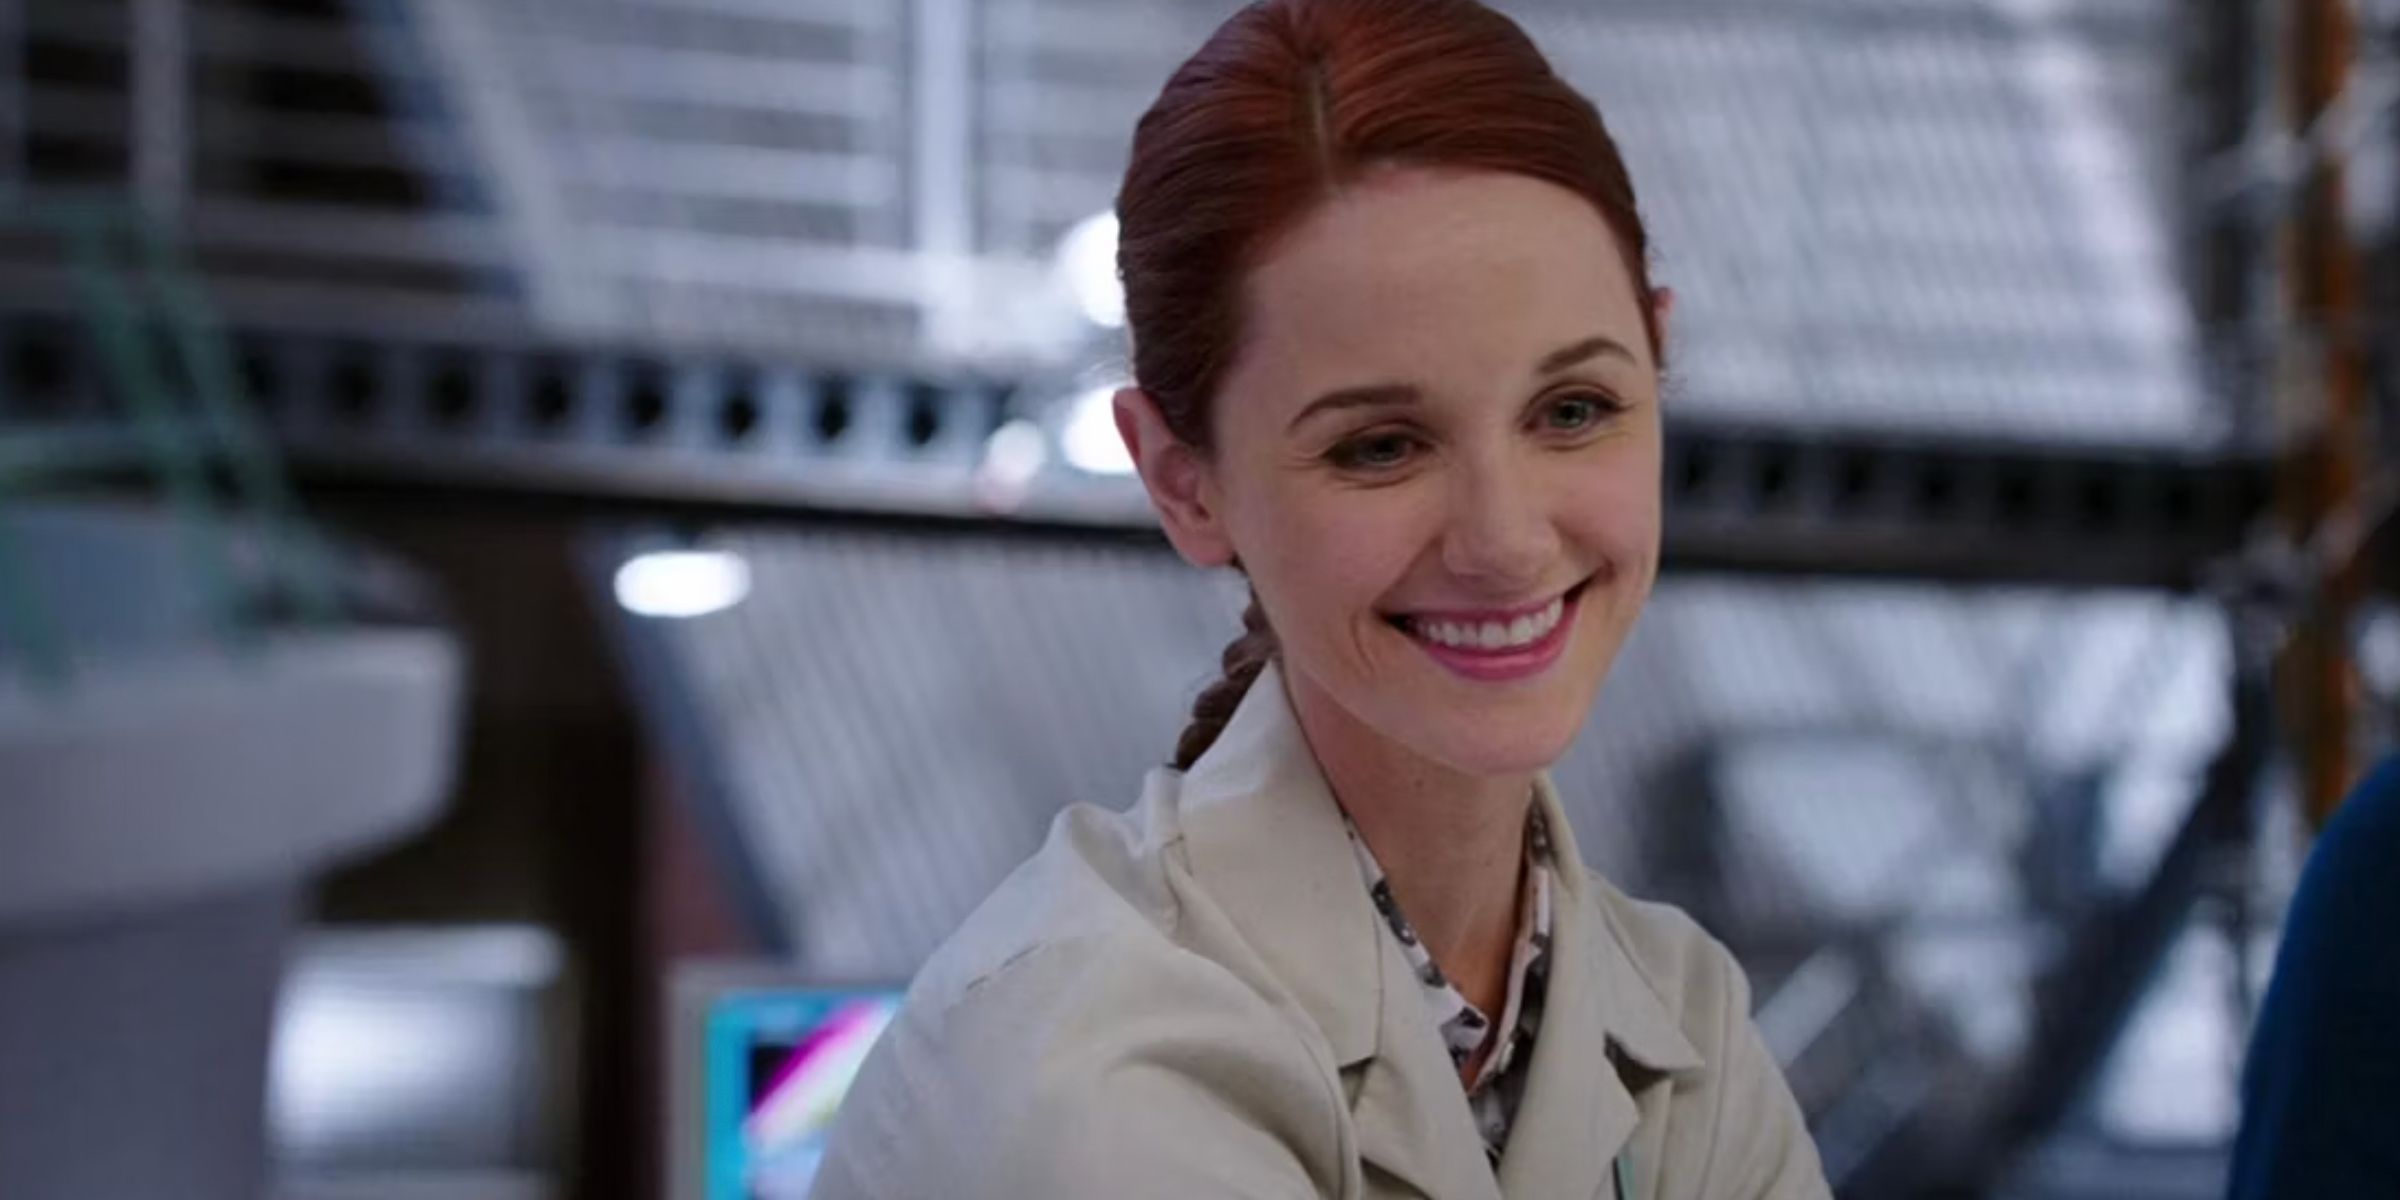 Jessica Warren smiles while working in the lab in Bones